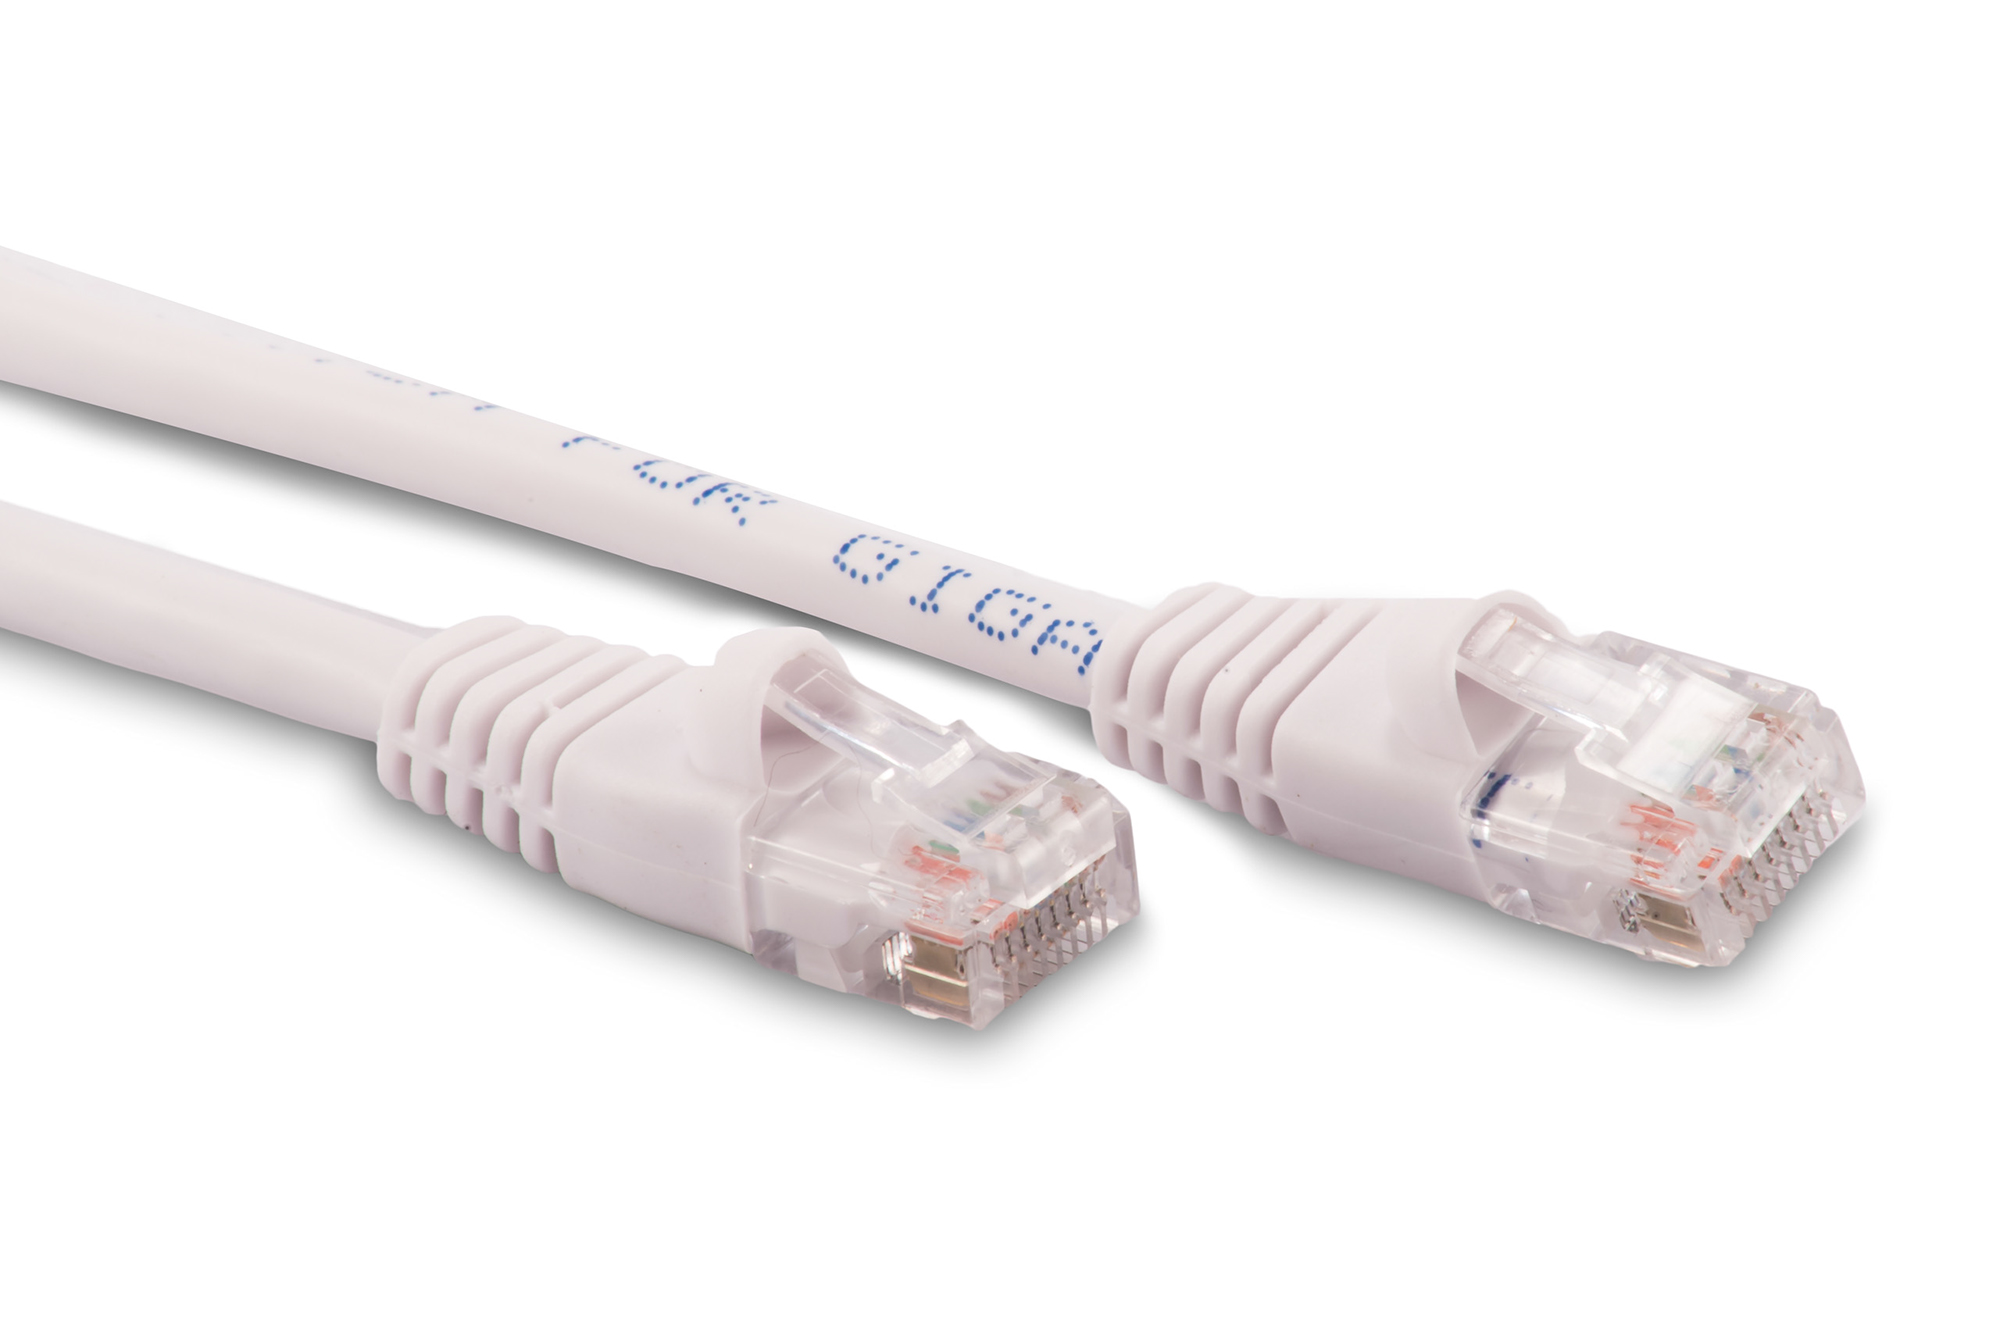 5ft Cat5e Ethernet Patch Cable - White Color - Snagless Boot, Stranded, RJ45, 350Mhz, 24AWG